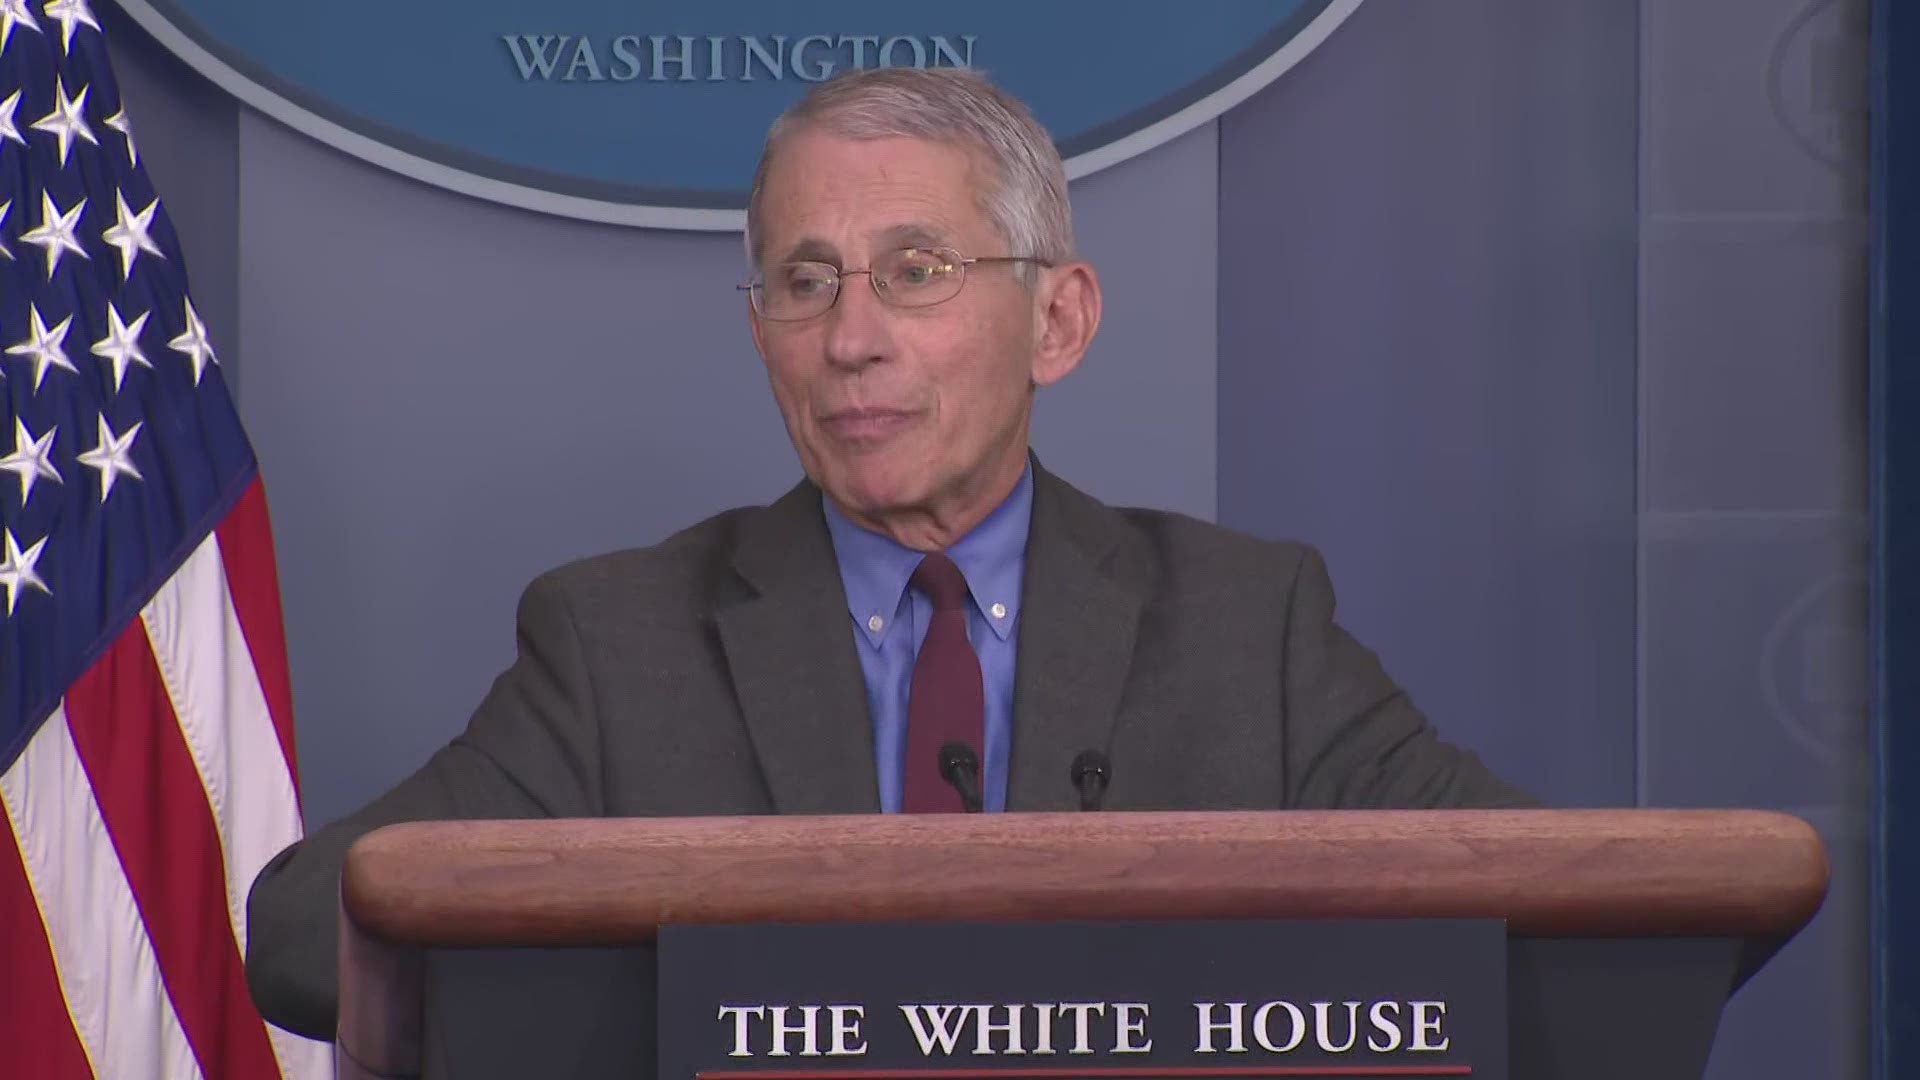 Dr. Anthony Fauci says despite encouraging news, Americans shouldn't pull back from current mitigation efforts.